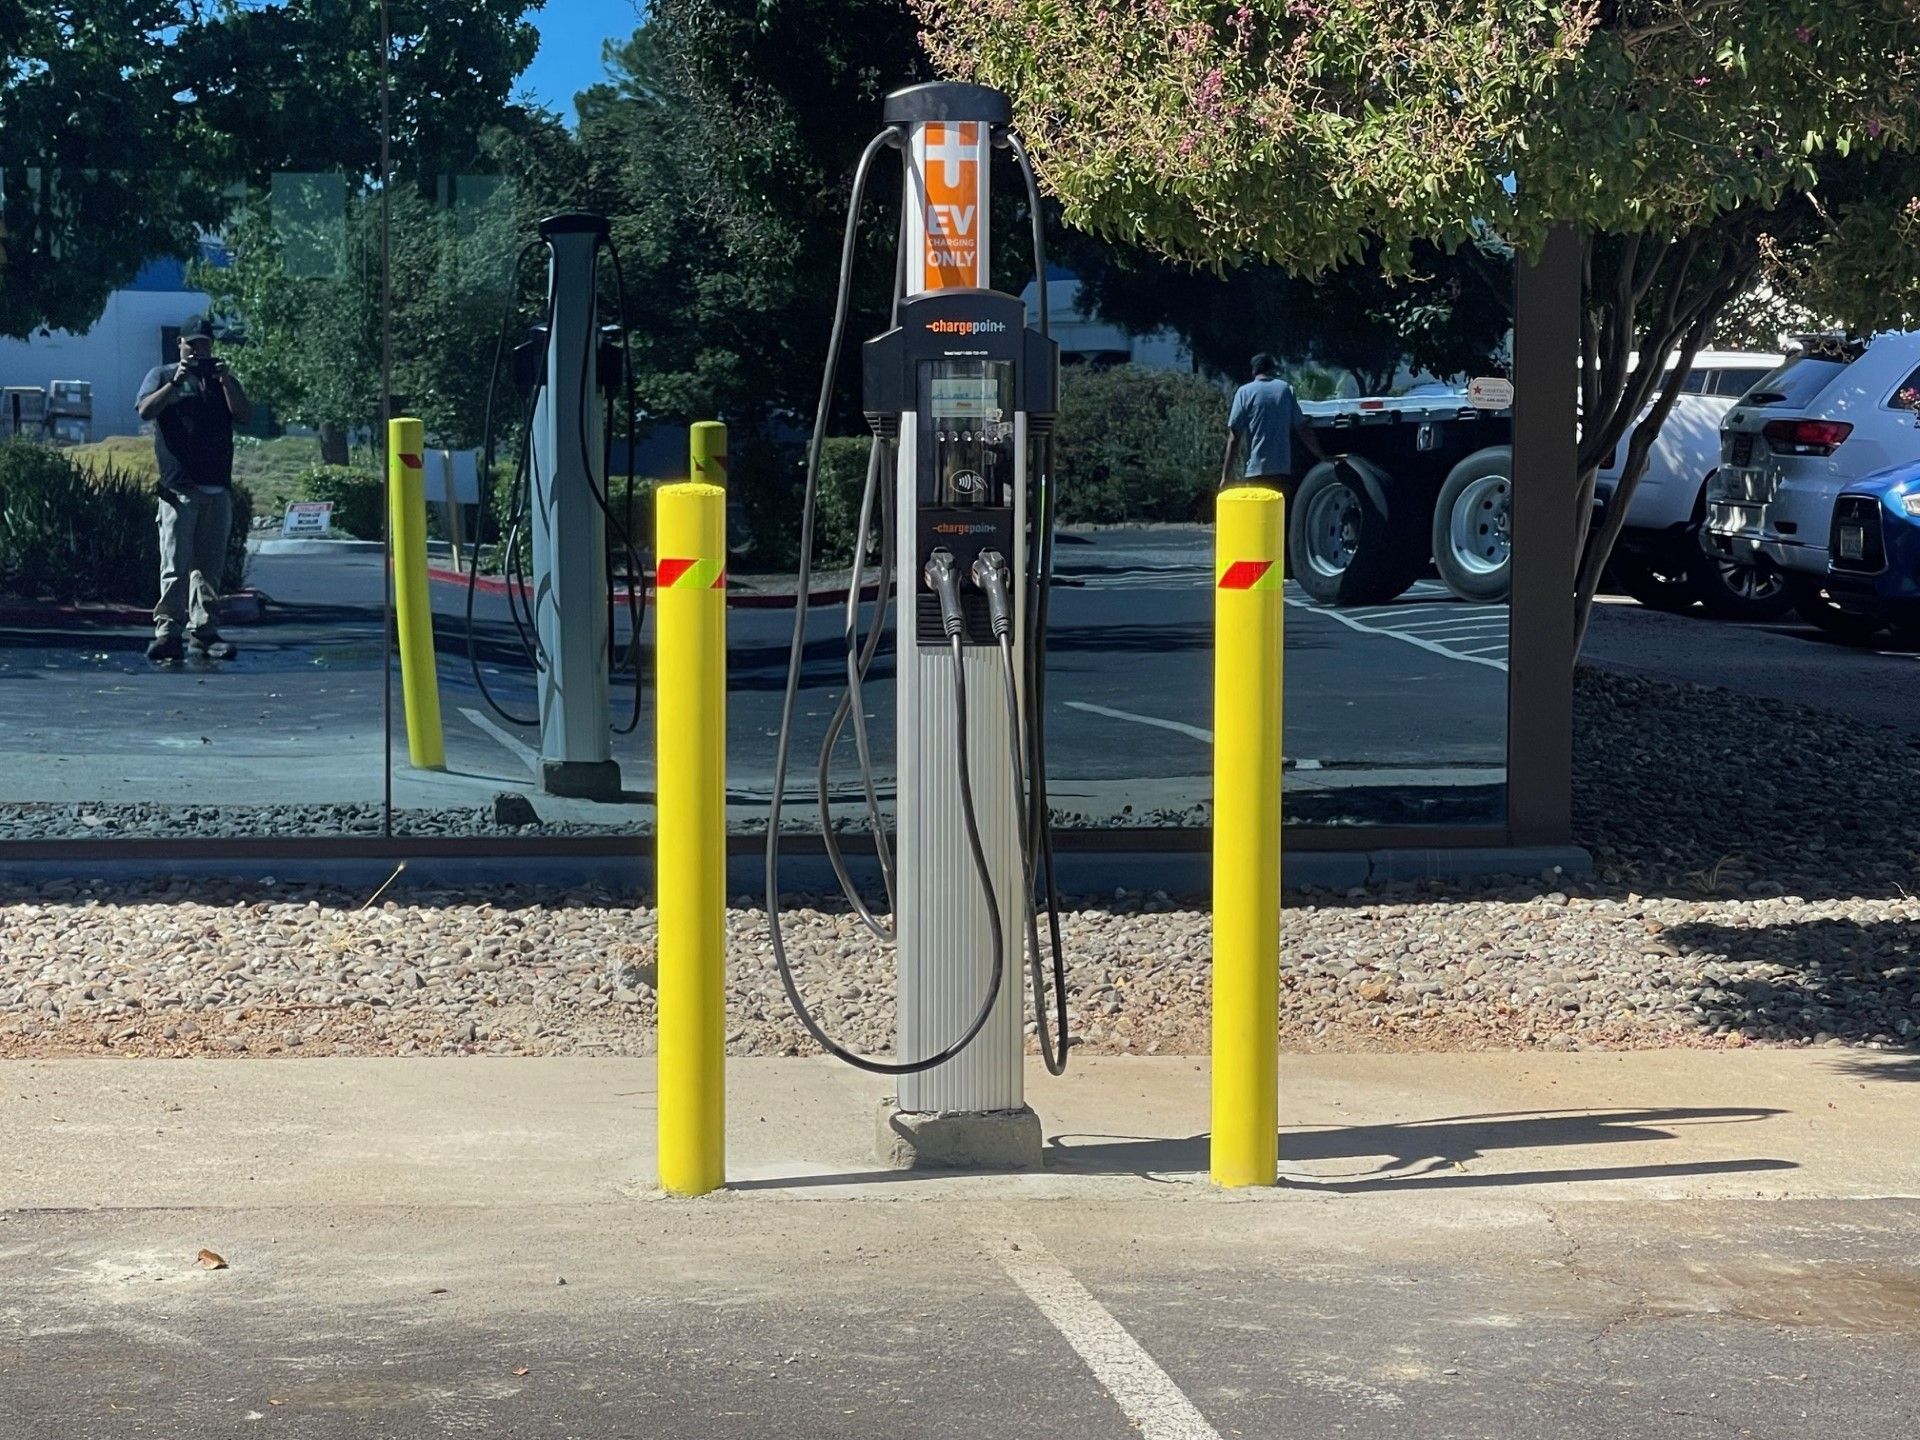 a charging station in a parking lot with yellow poles around it